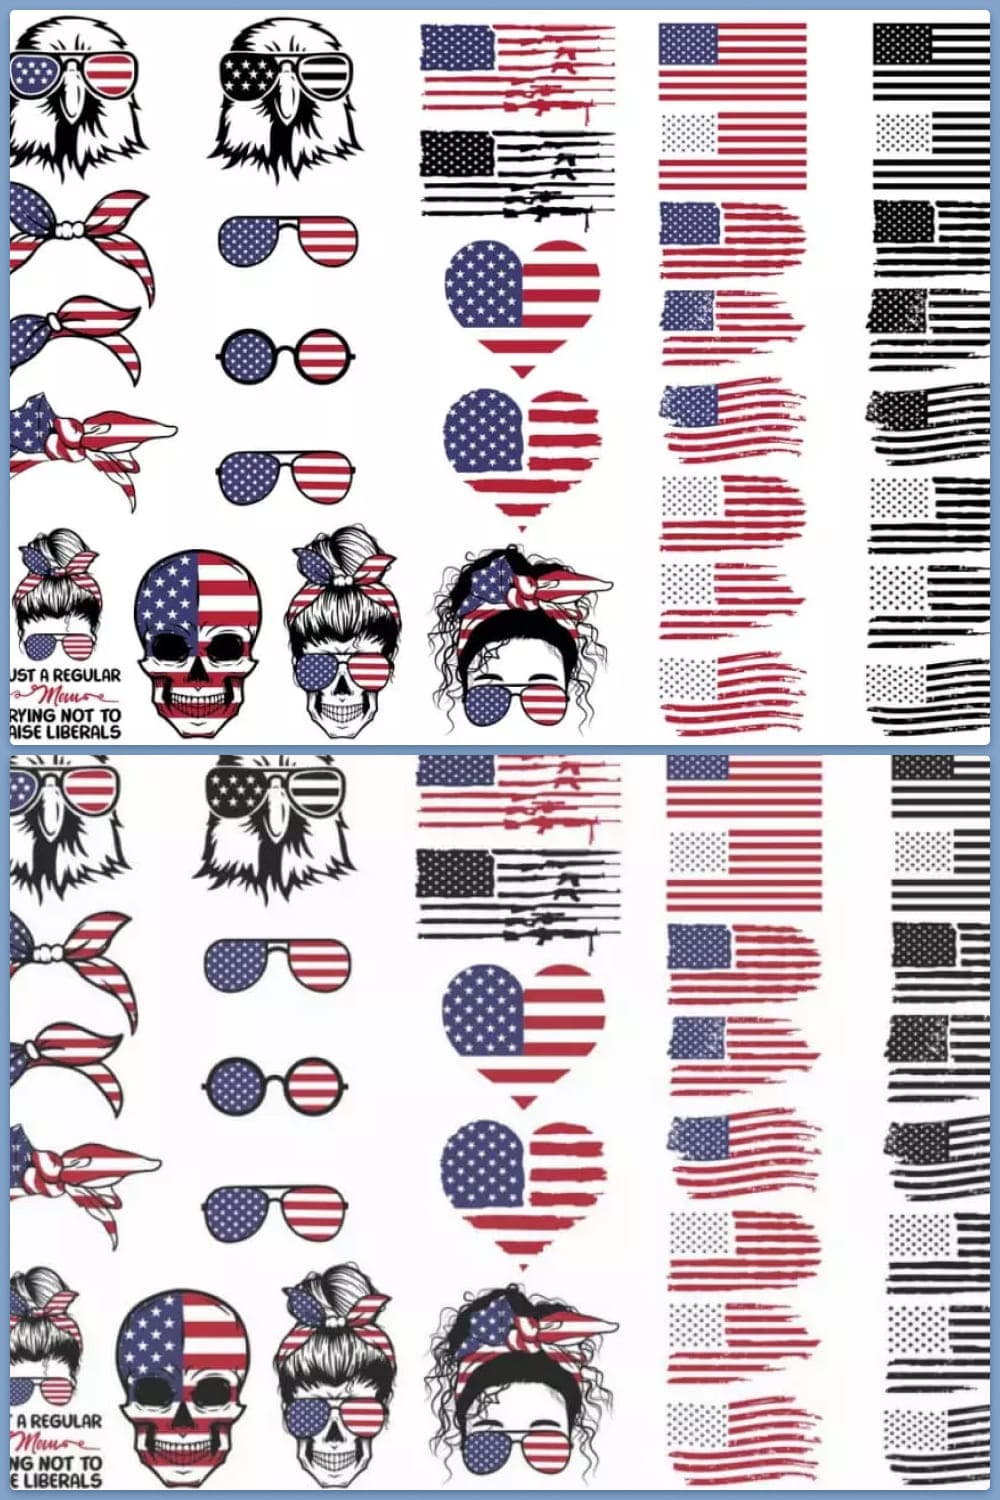 Flags, eyeglasses, stylish eagles, and American flag style characters-.